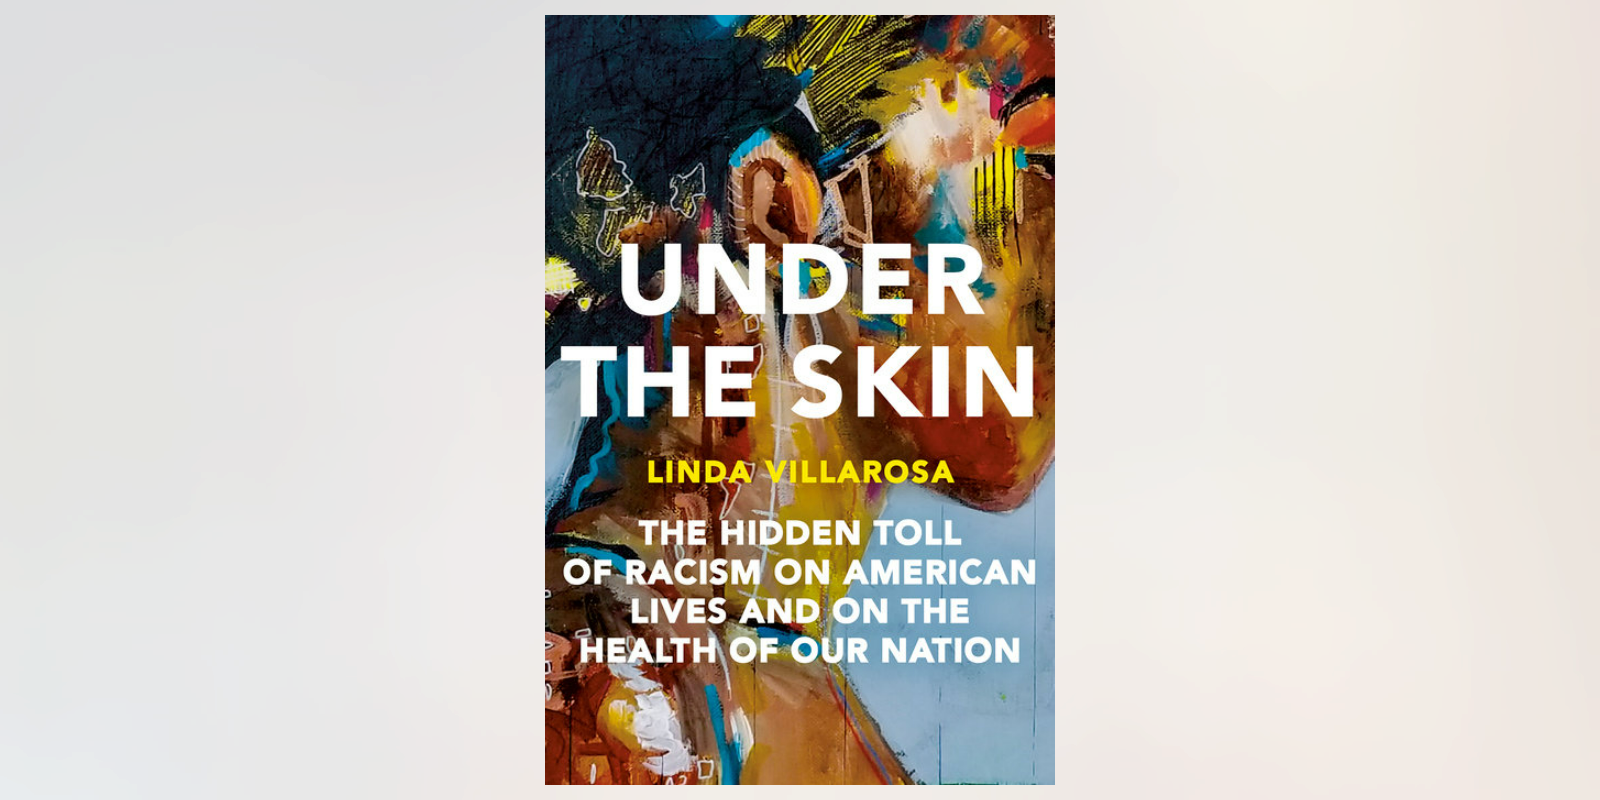 FROM THE PAGE: An Excerpt from Linda Villarosa’s <i>Under the Skin</i>